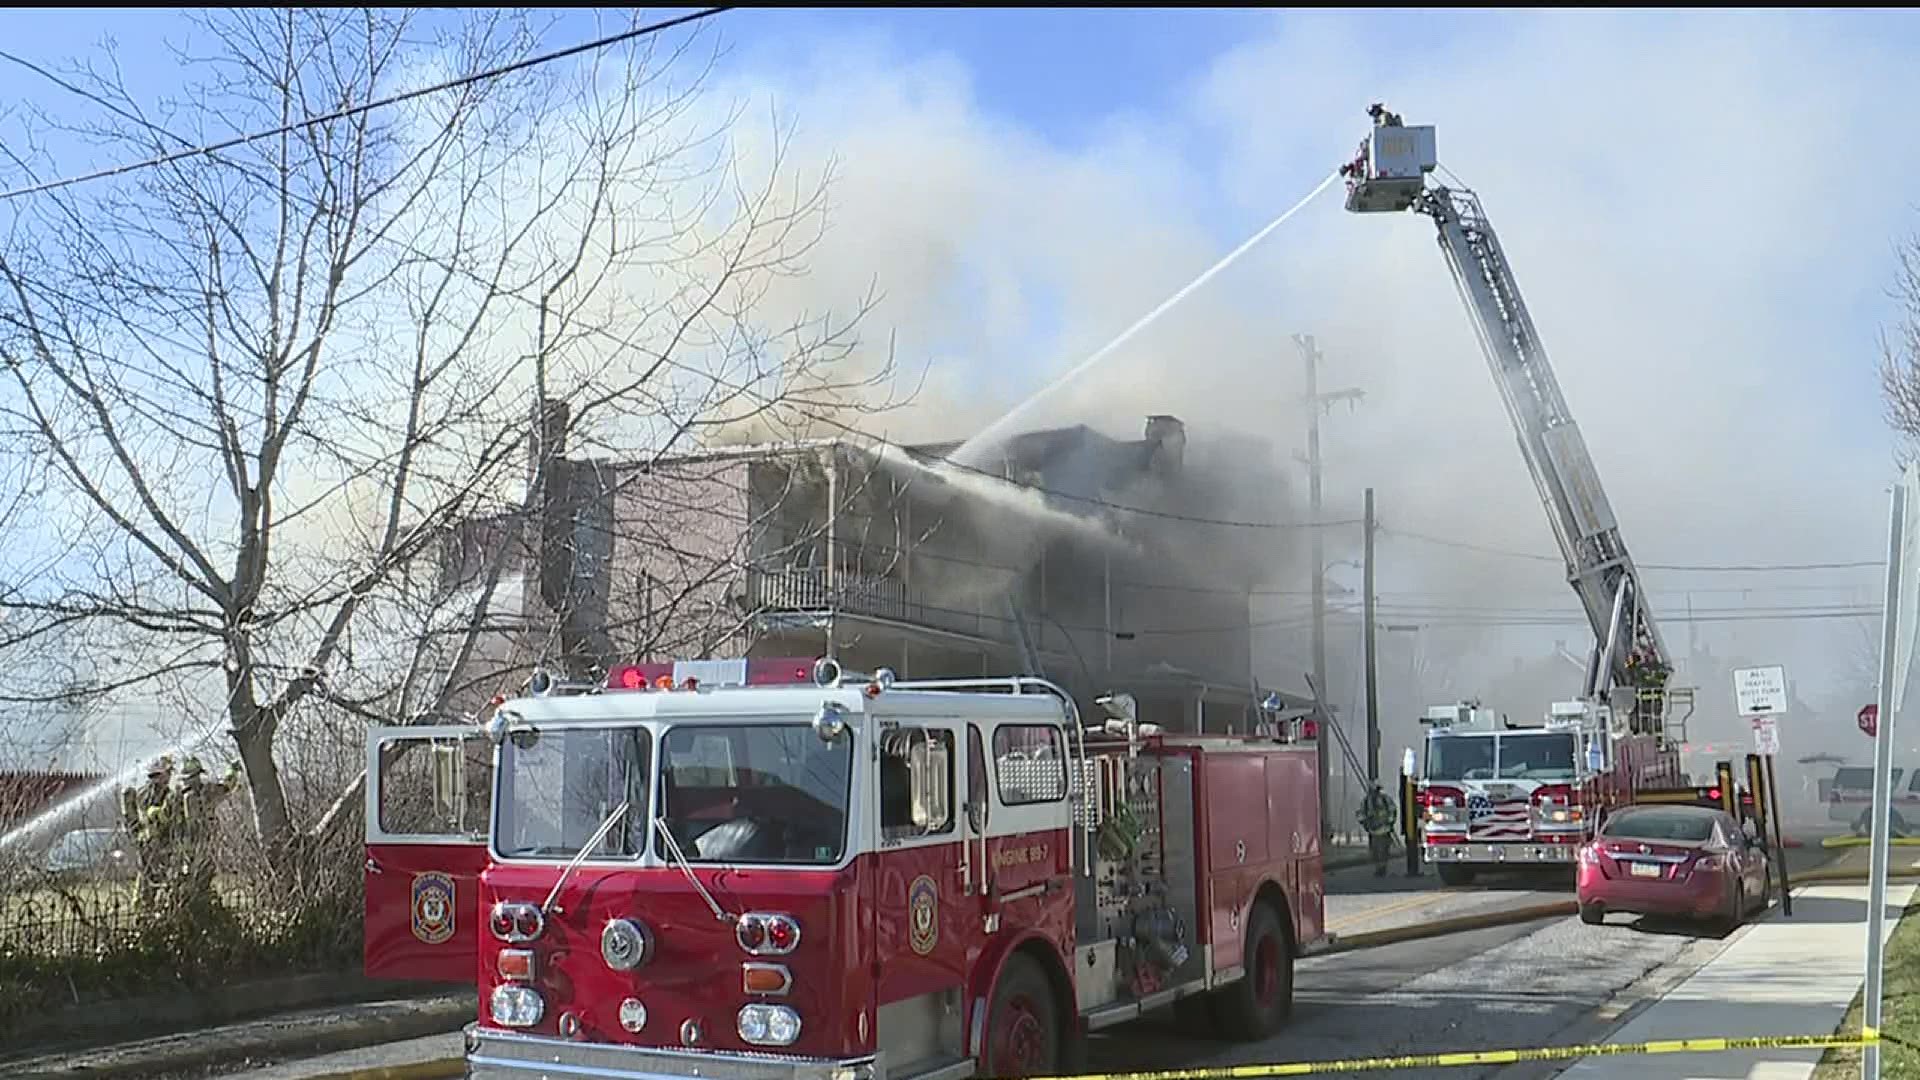 Firefighters spent hours trying to extinguish the flames that tore through row homes on East Philadelphia Street